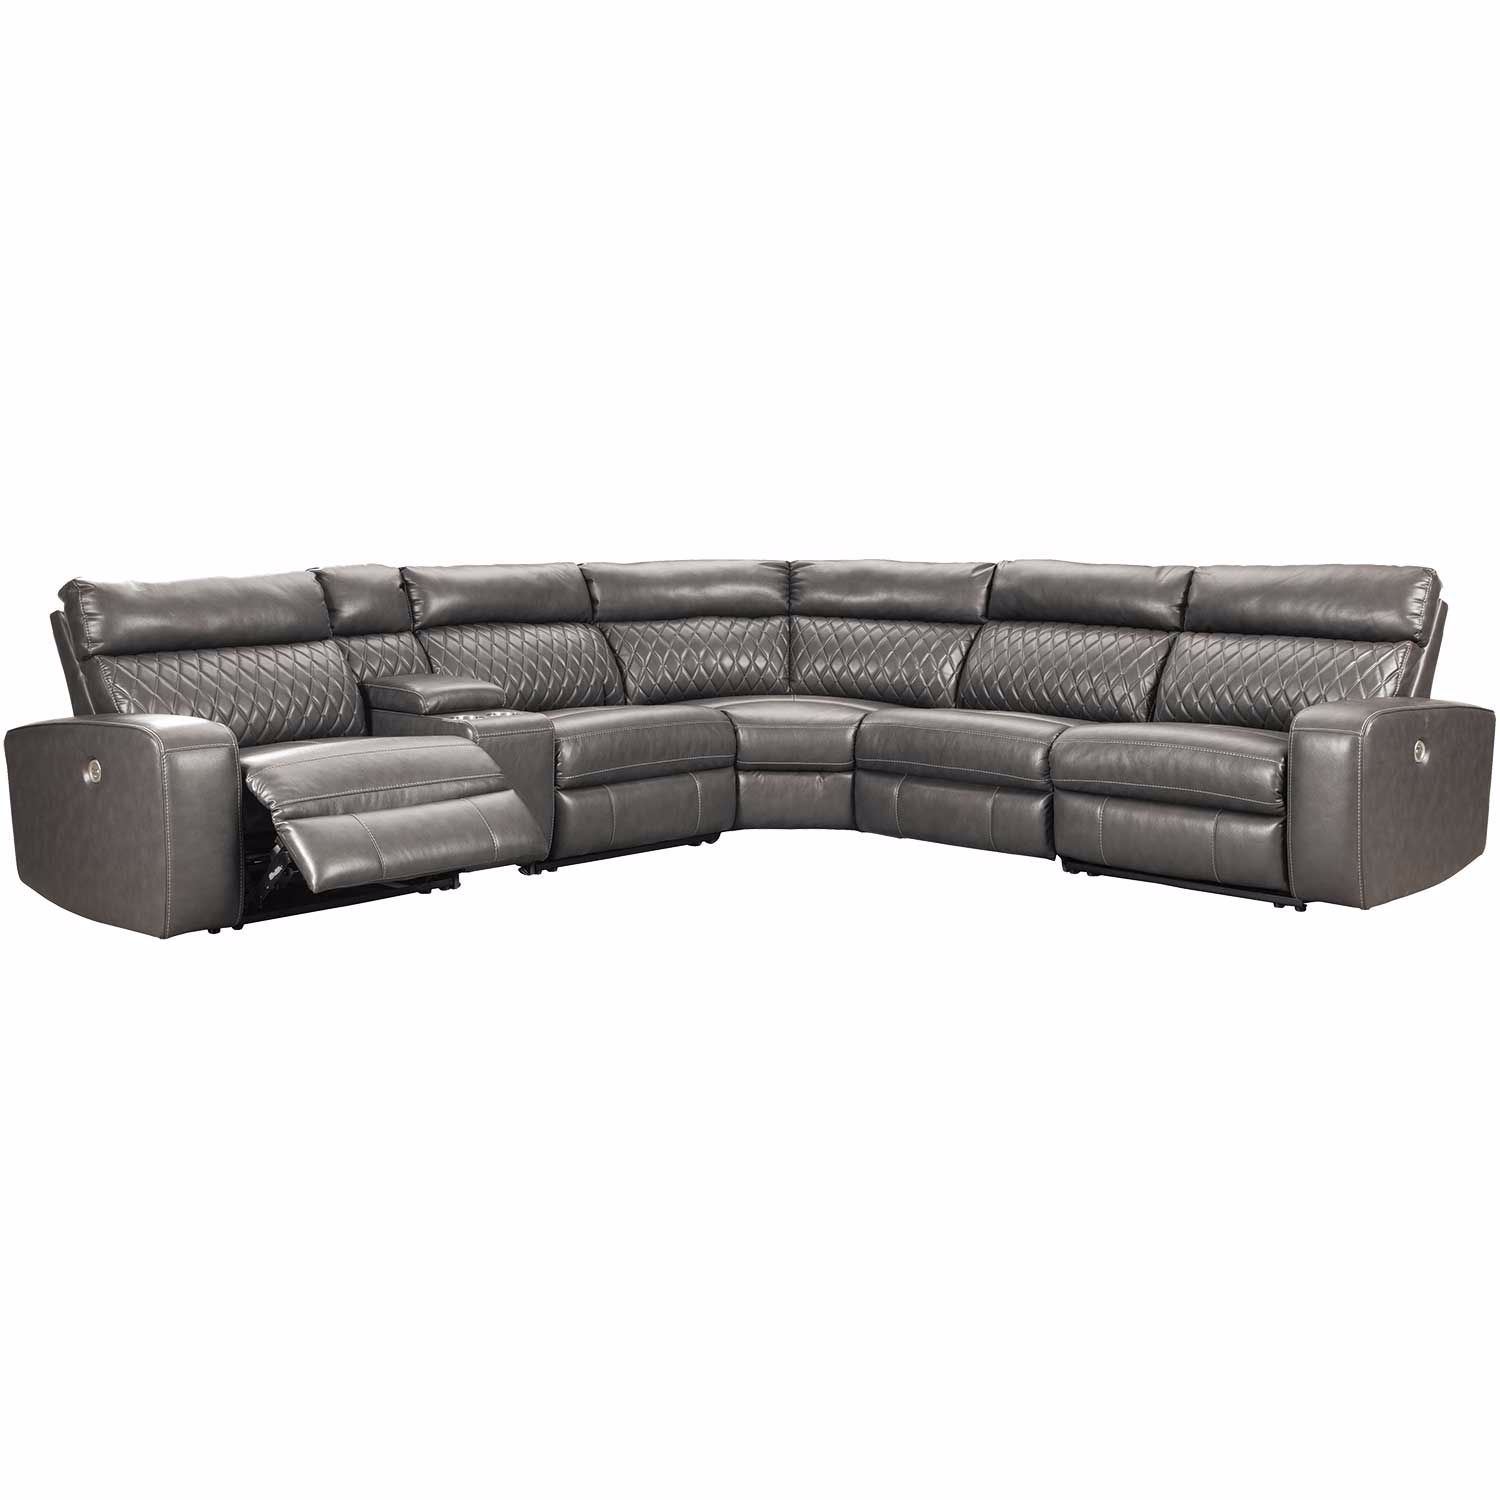 Samperstone 6PC Power Reclining Sectional | 0K0-552-6PC | AFW.com